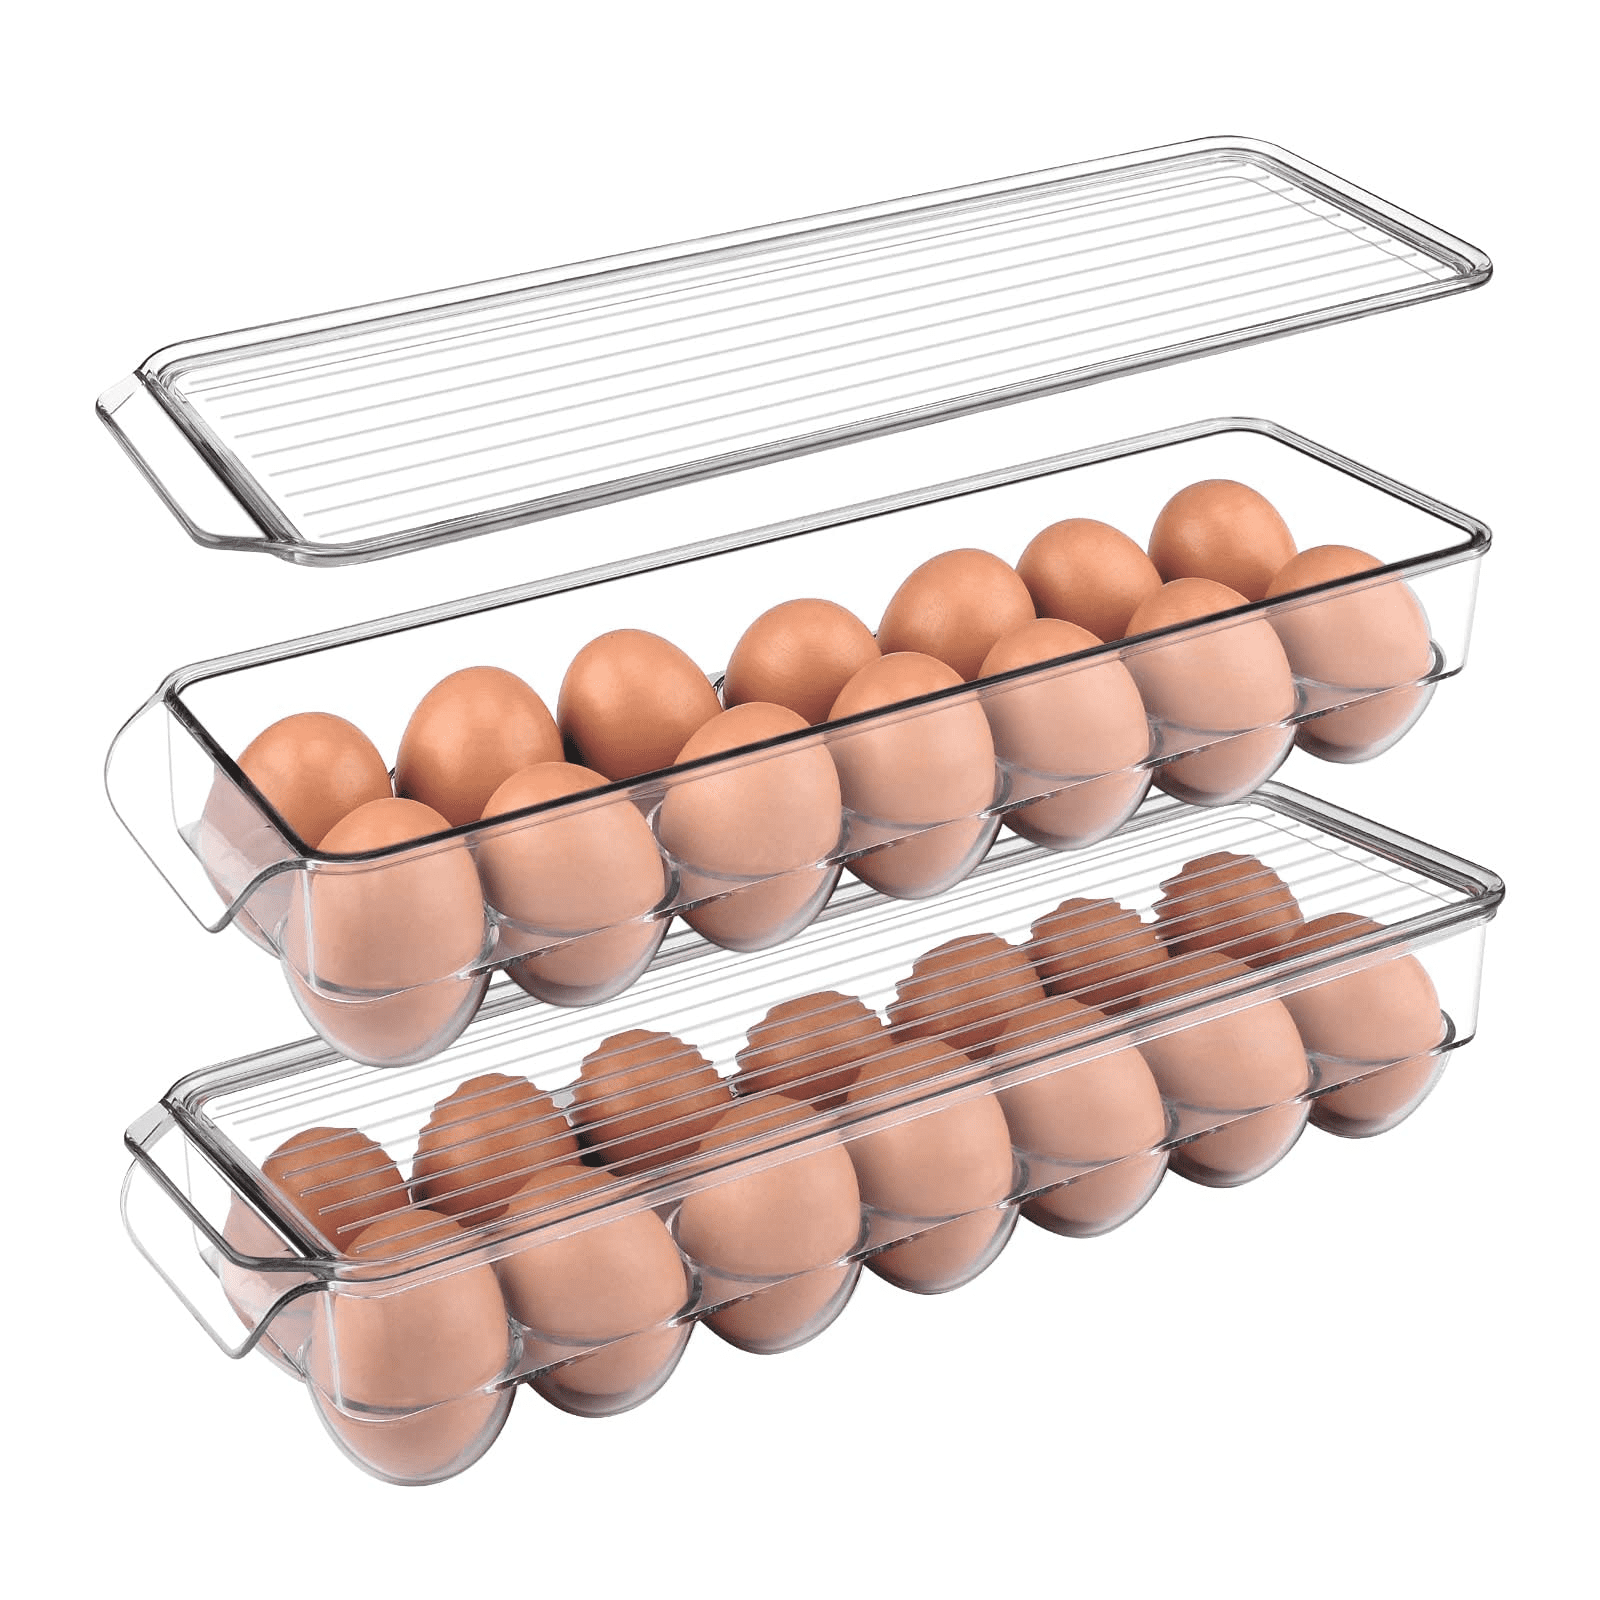 Color : Blue Kitchen Tools Fridge Egg Holder Storage Containers With Lid Egg Tray Practical Egg Storage Case For Refrigerator Stackable Egg Container Egg Spoon 